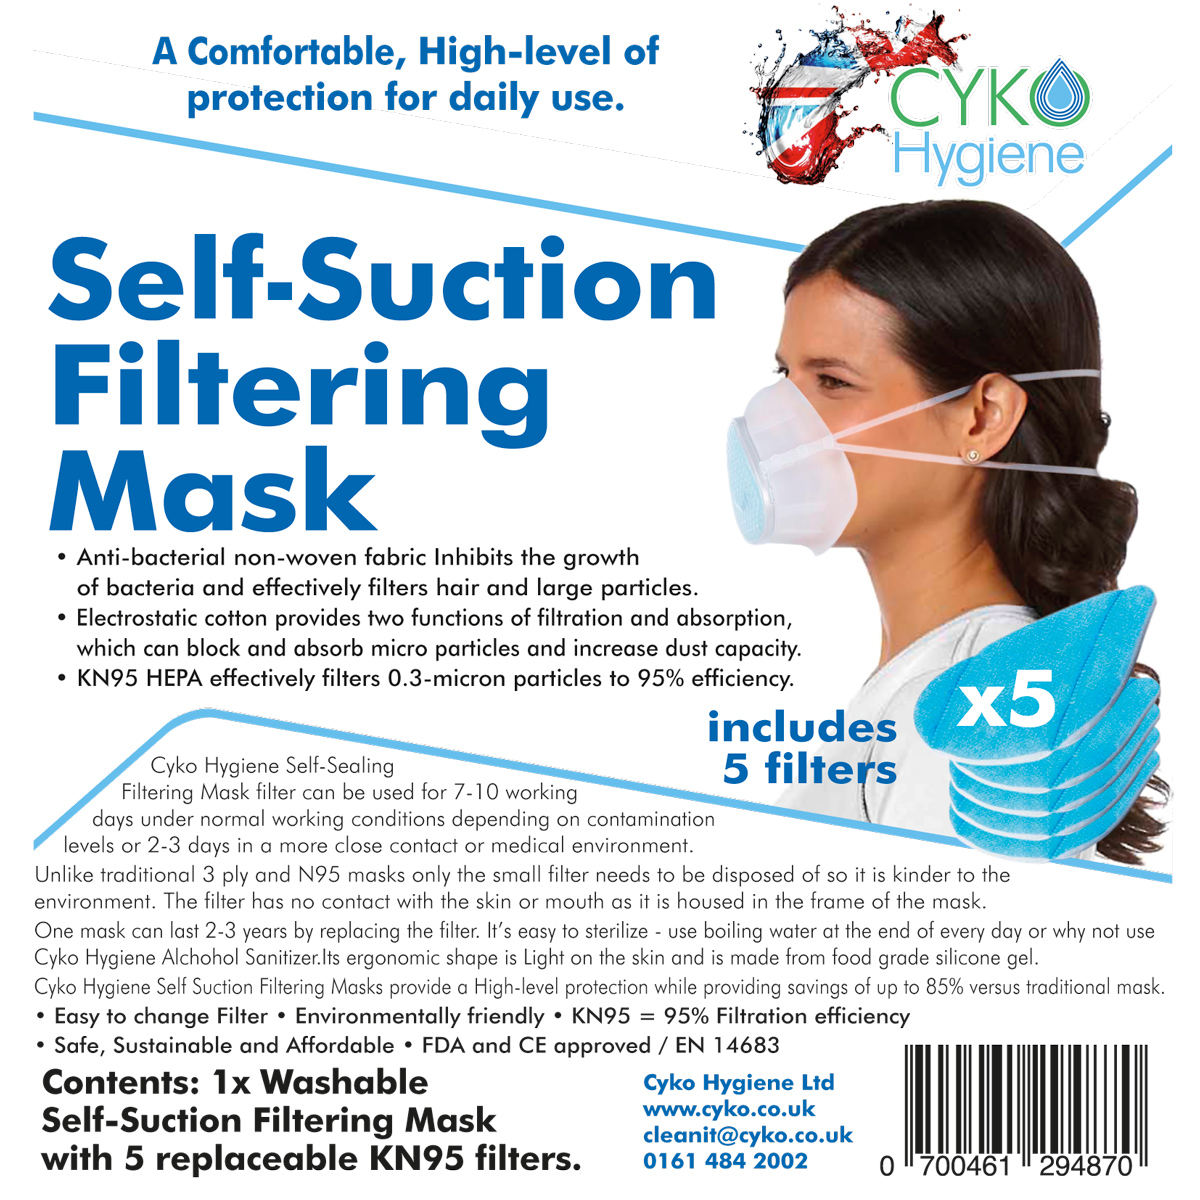 Our KN95 Face Masks, with 5 filters included.